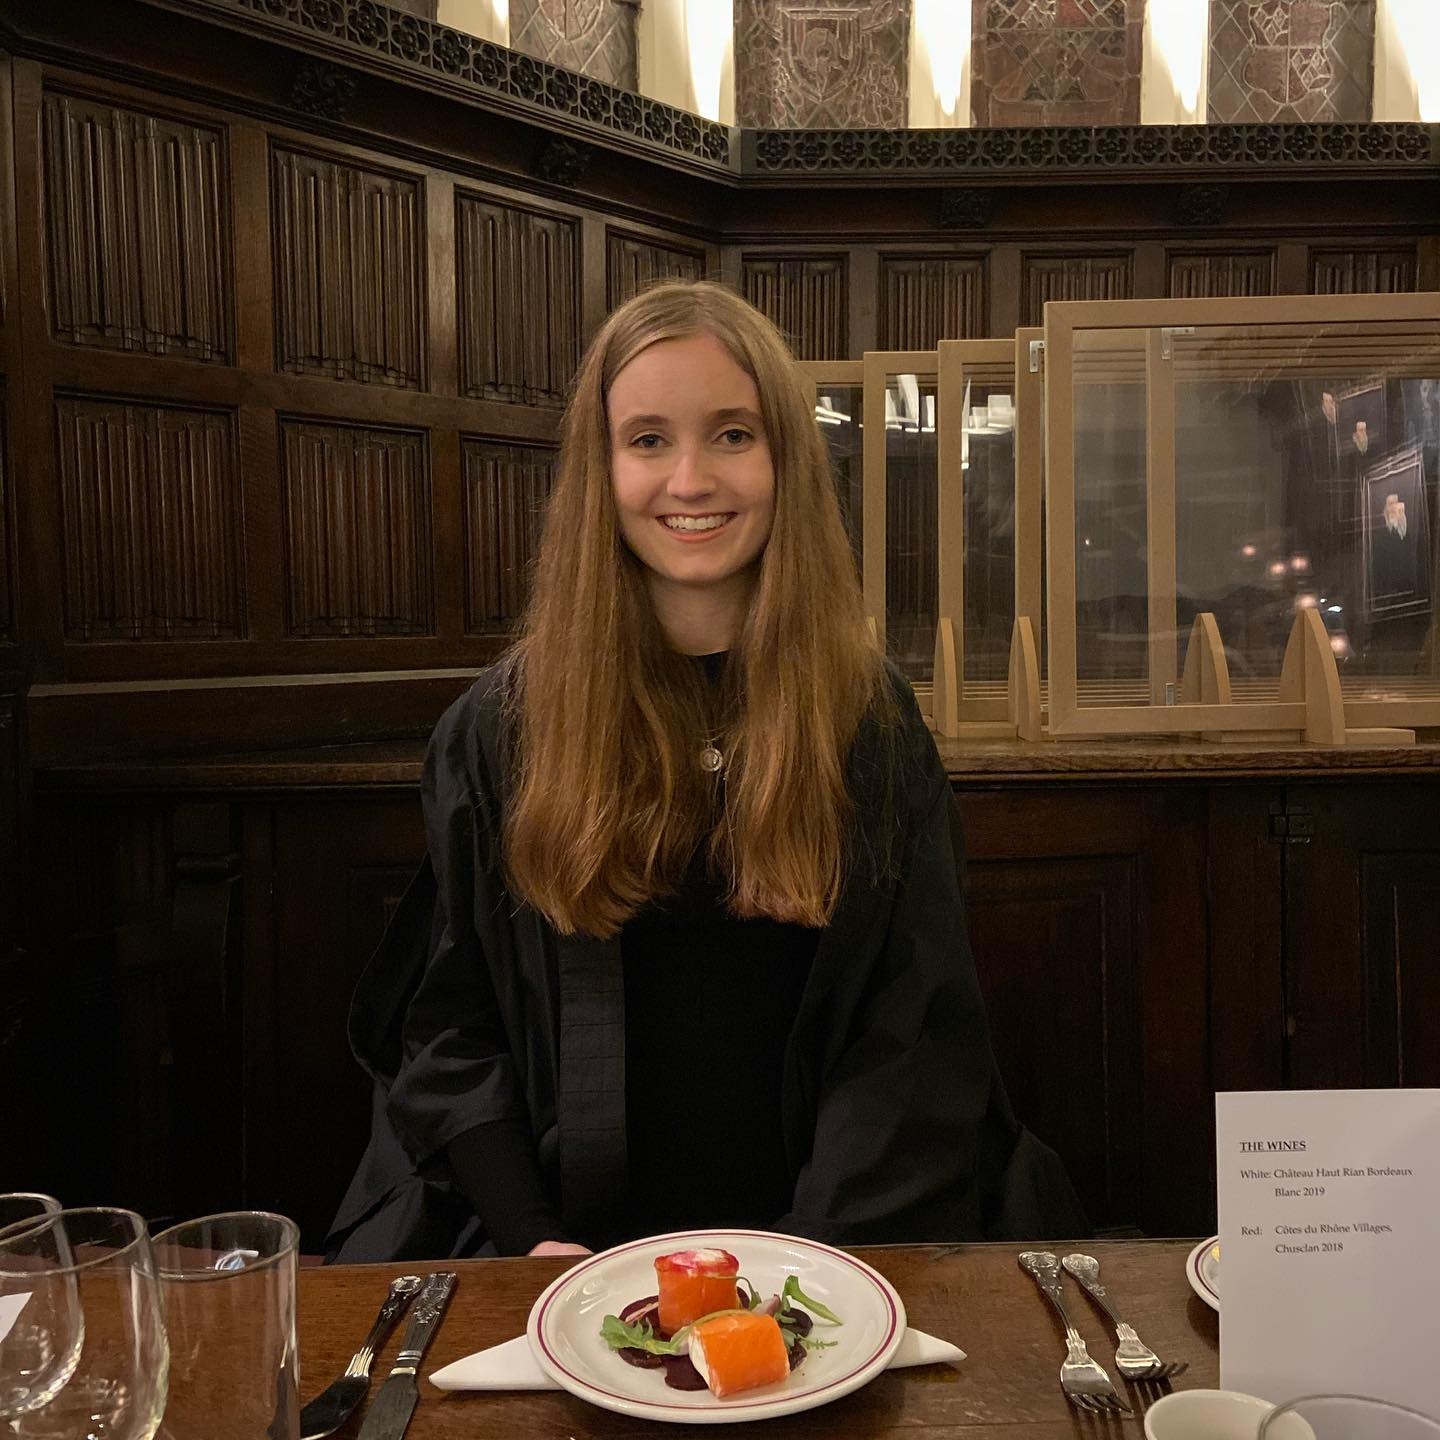 A student in a gown, in front of a plate of food, smiling. She's in front of some old-looking wood-panelled walls